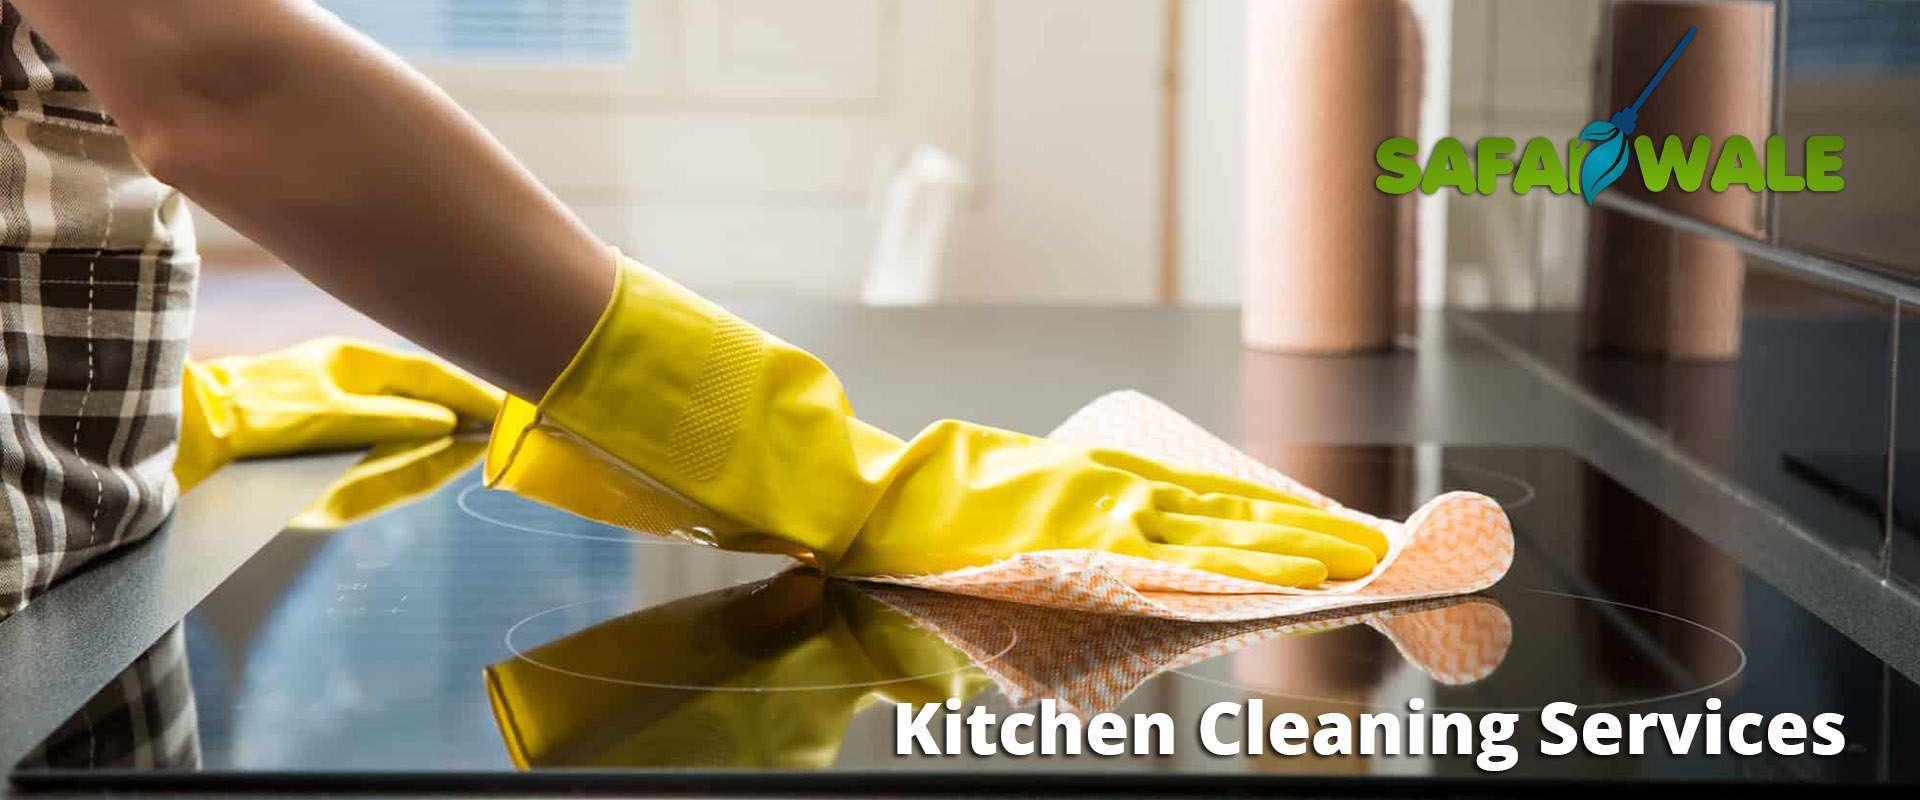 kitchen cleaning services in Surat